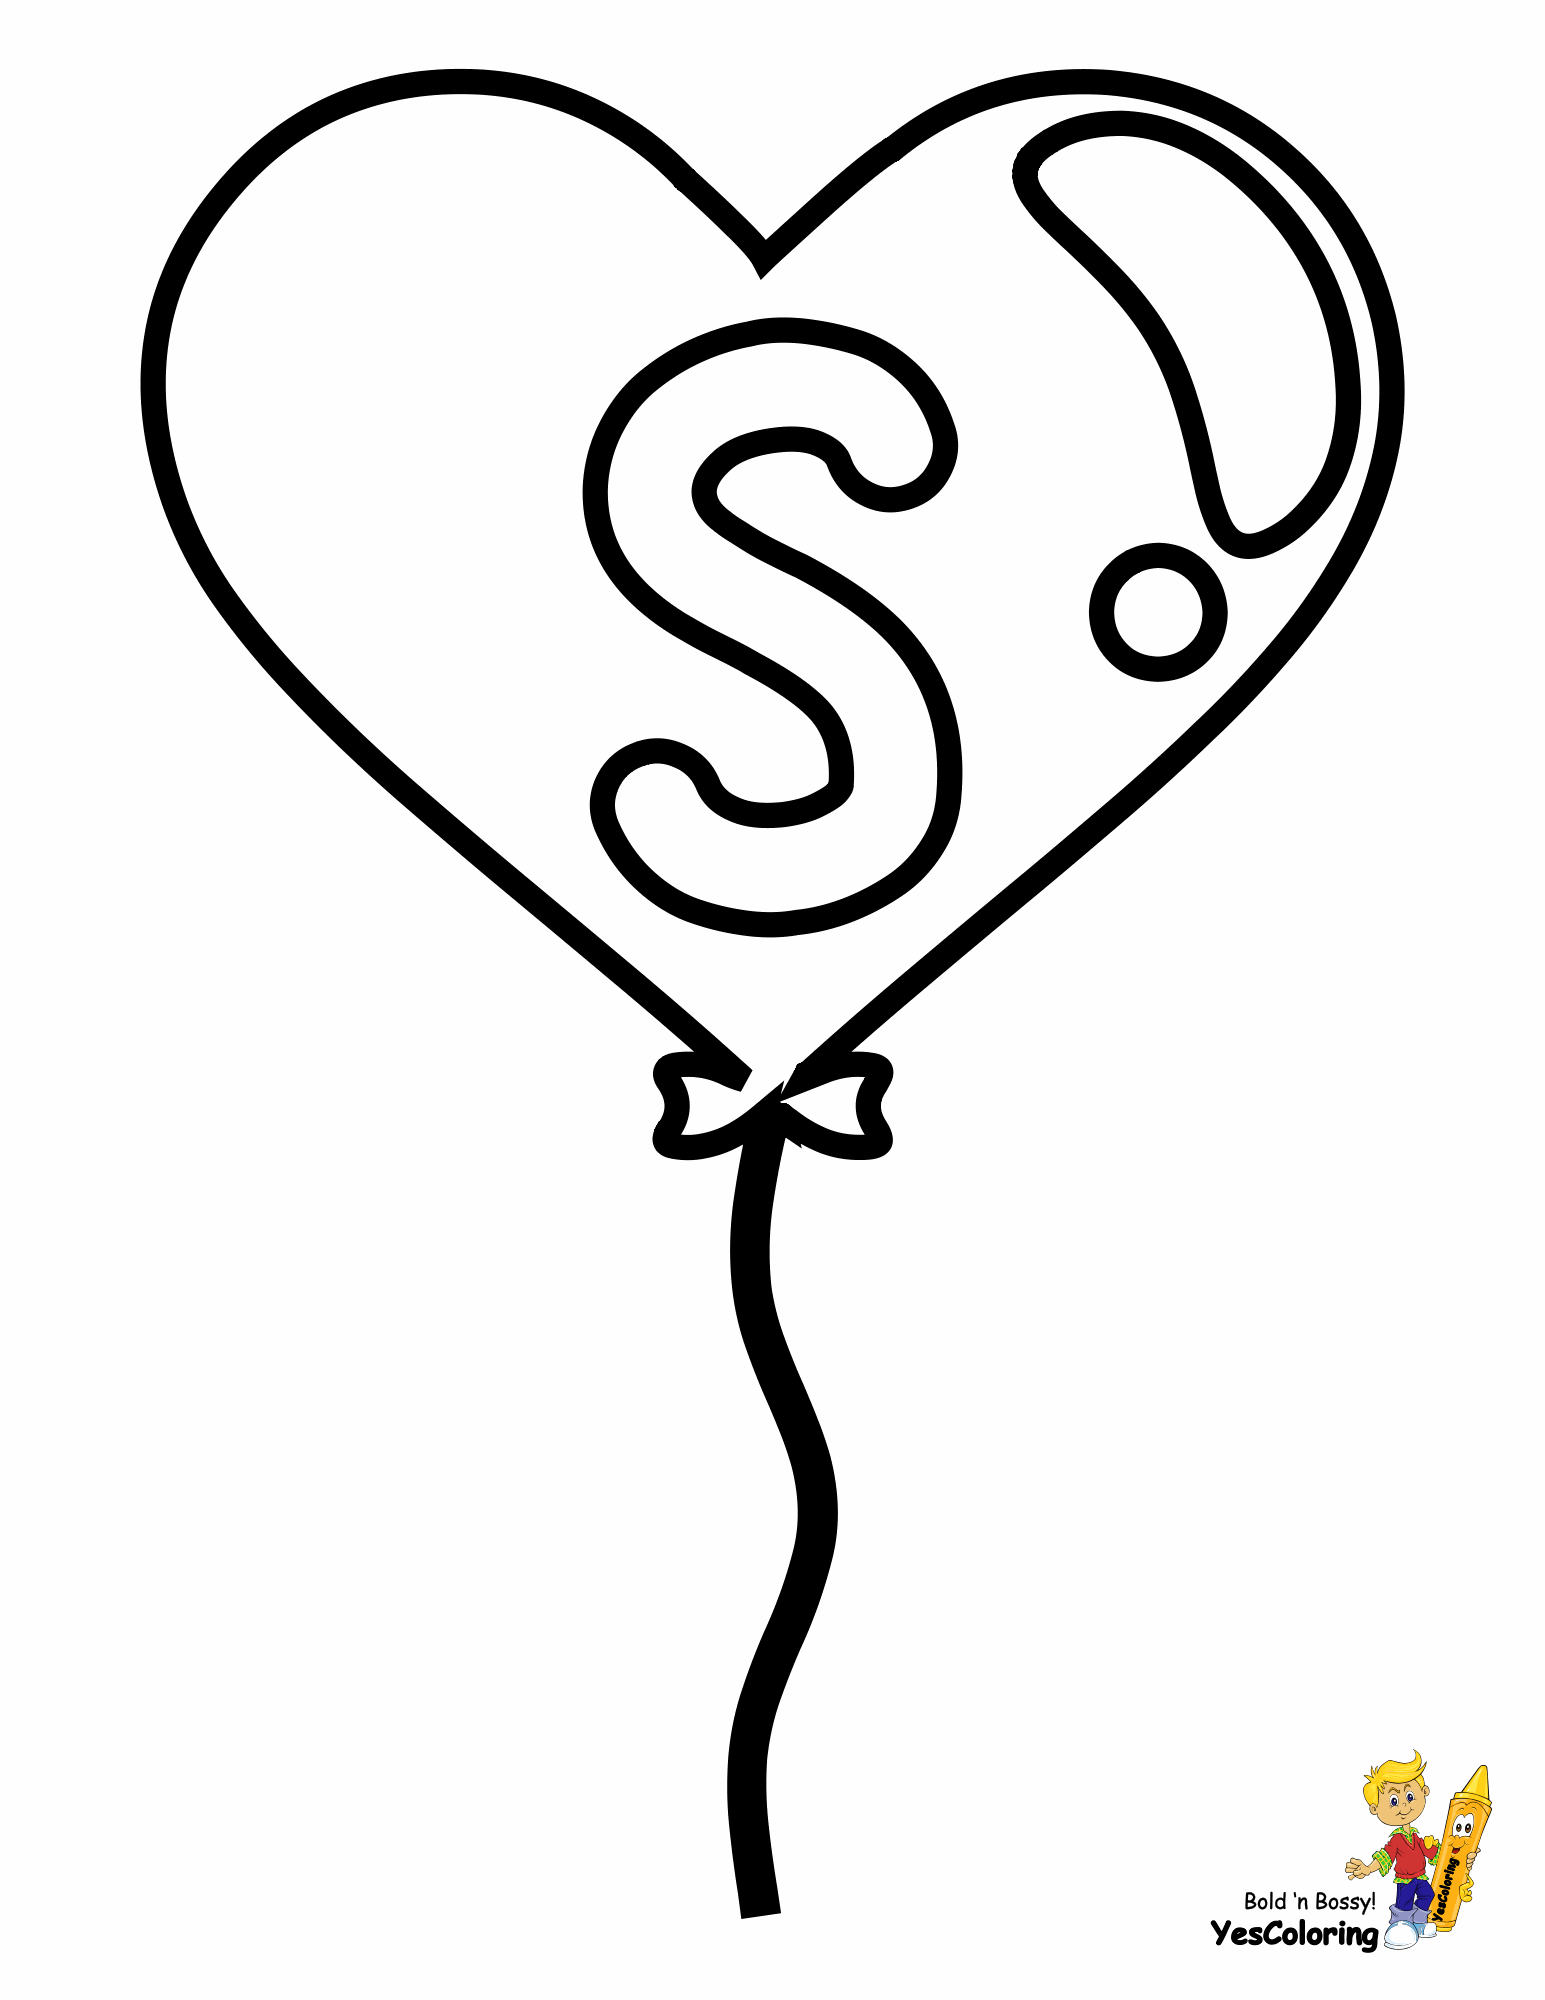 Easy Coloring Pages Free Alphabets | 39 Balloon Hearts ABCs 123s